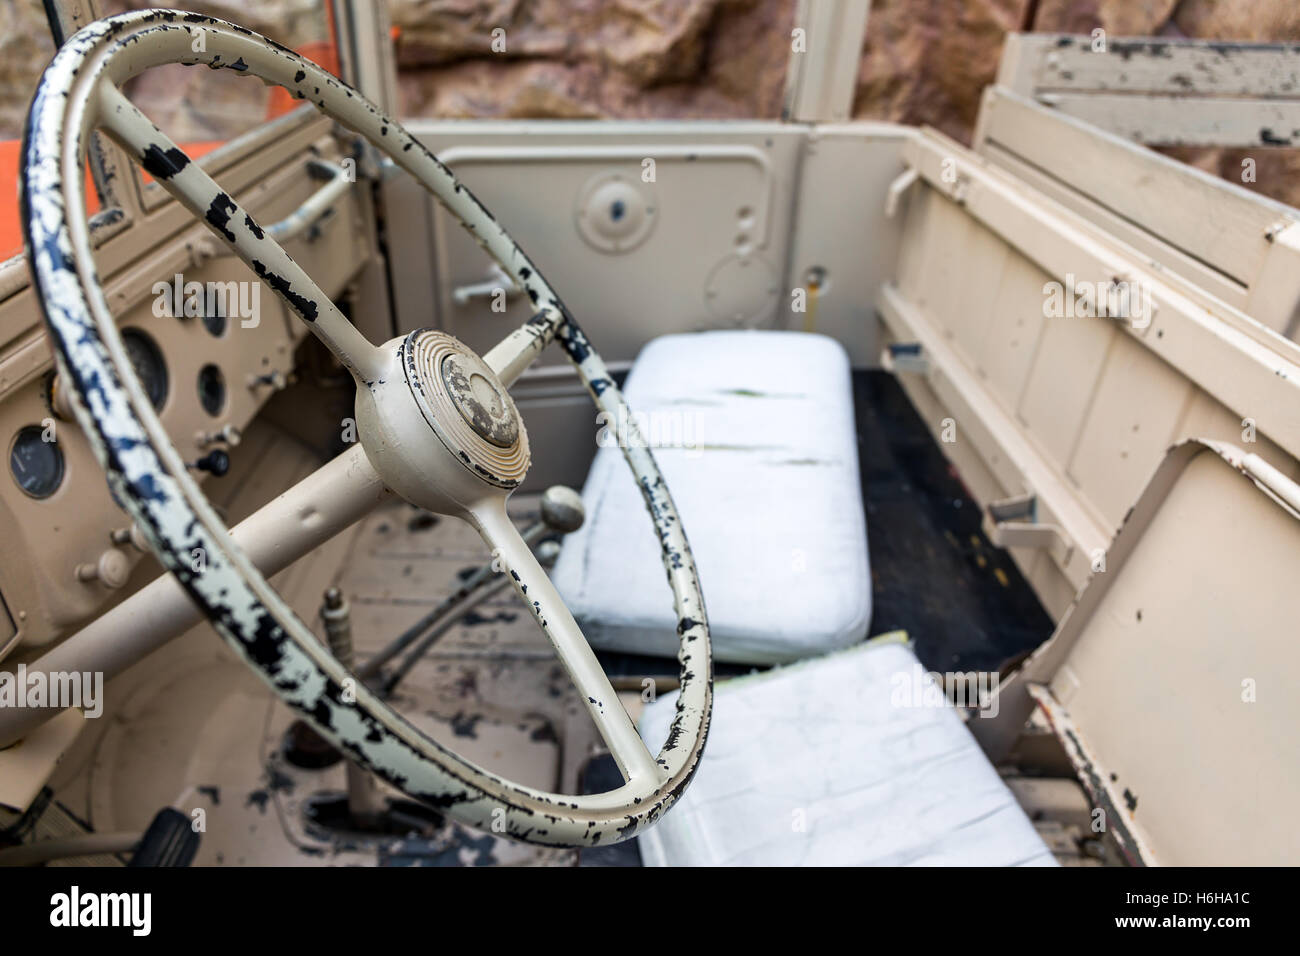 Interior of old and rusty military vehicle Stock Photo - Alamy